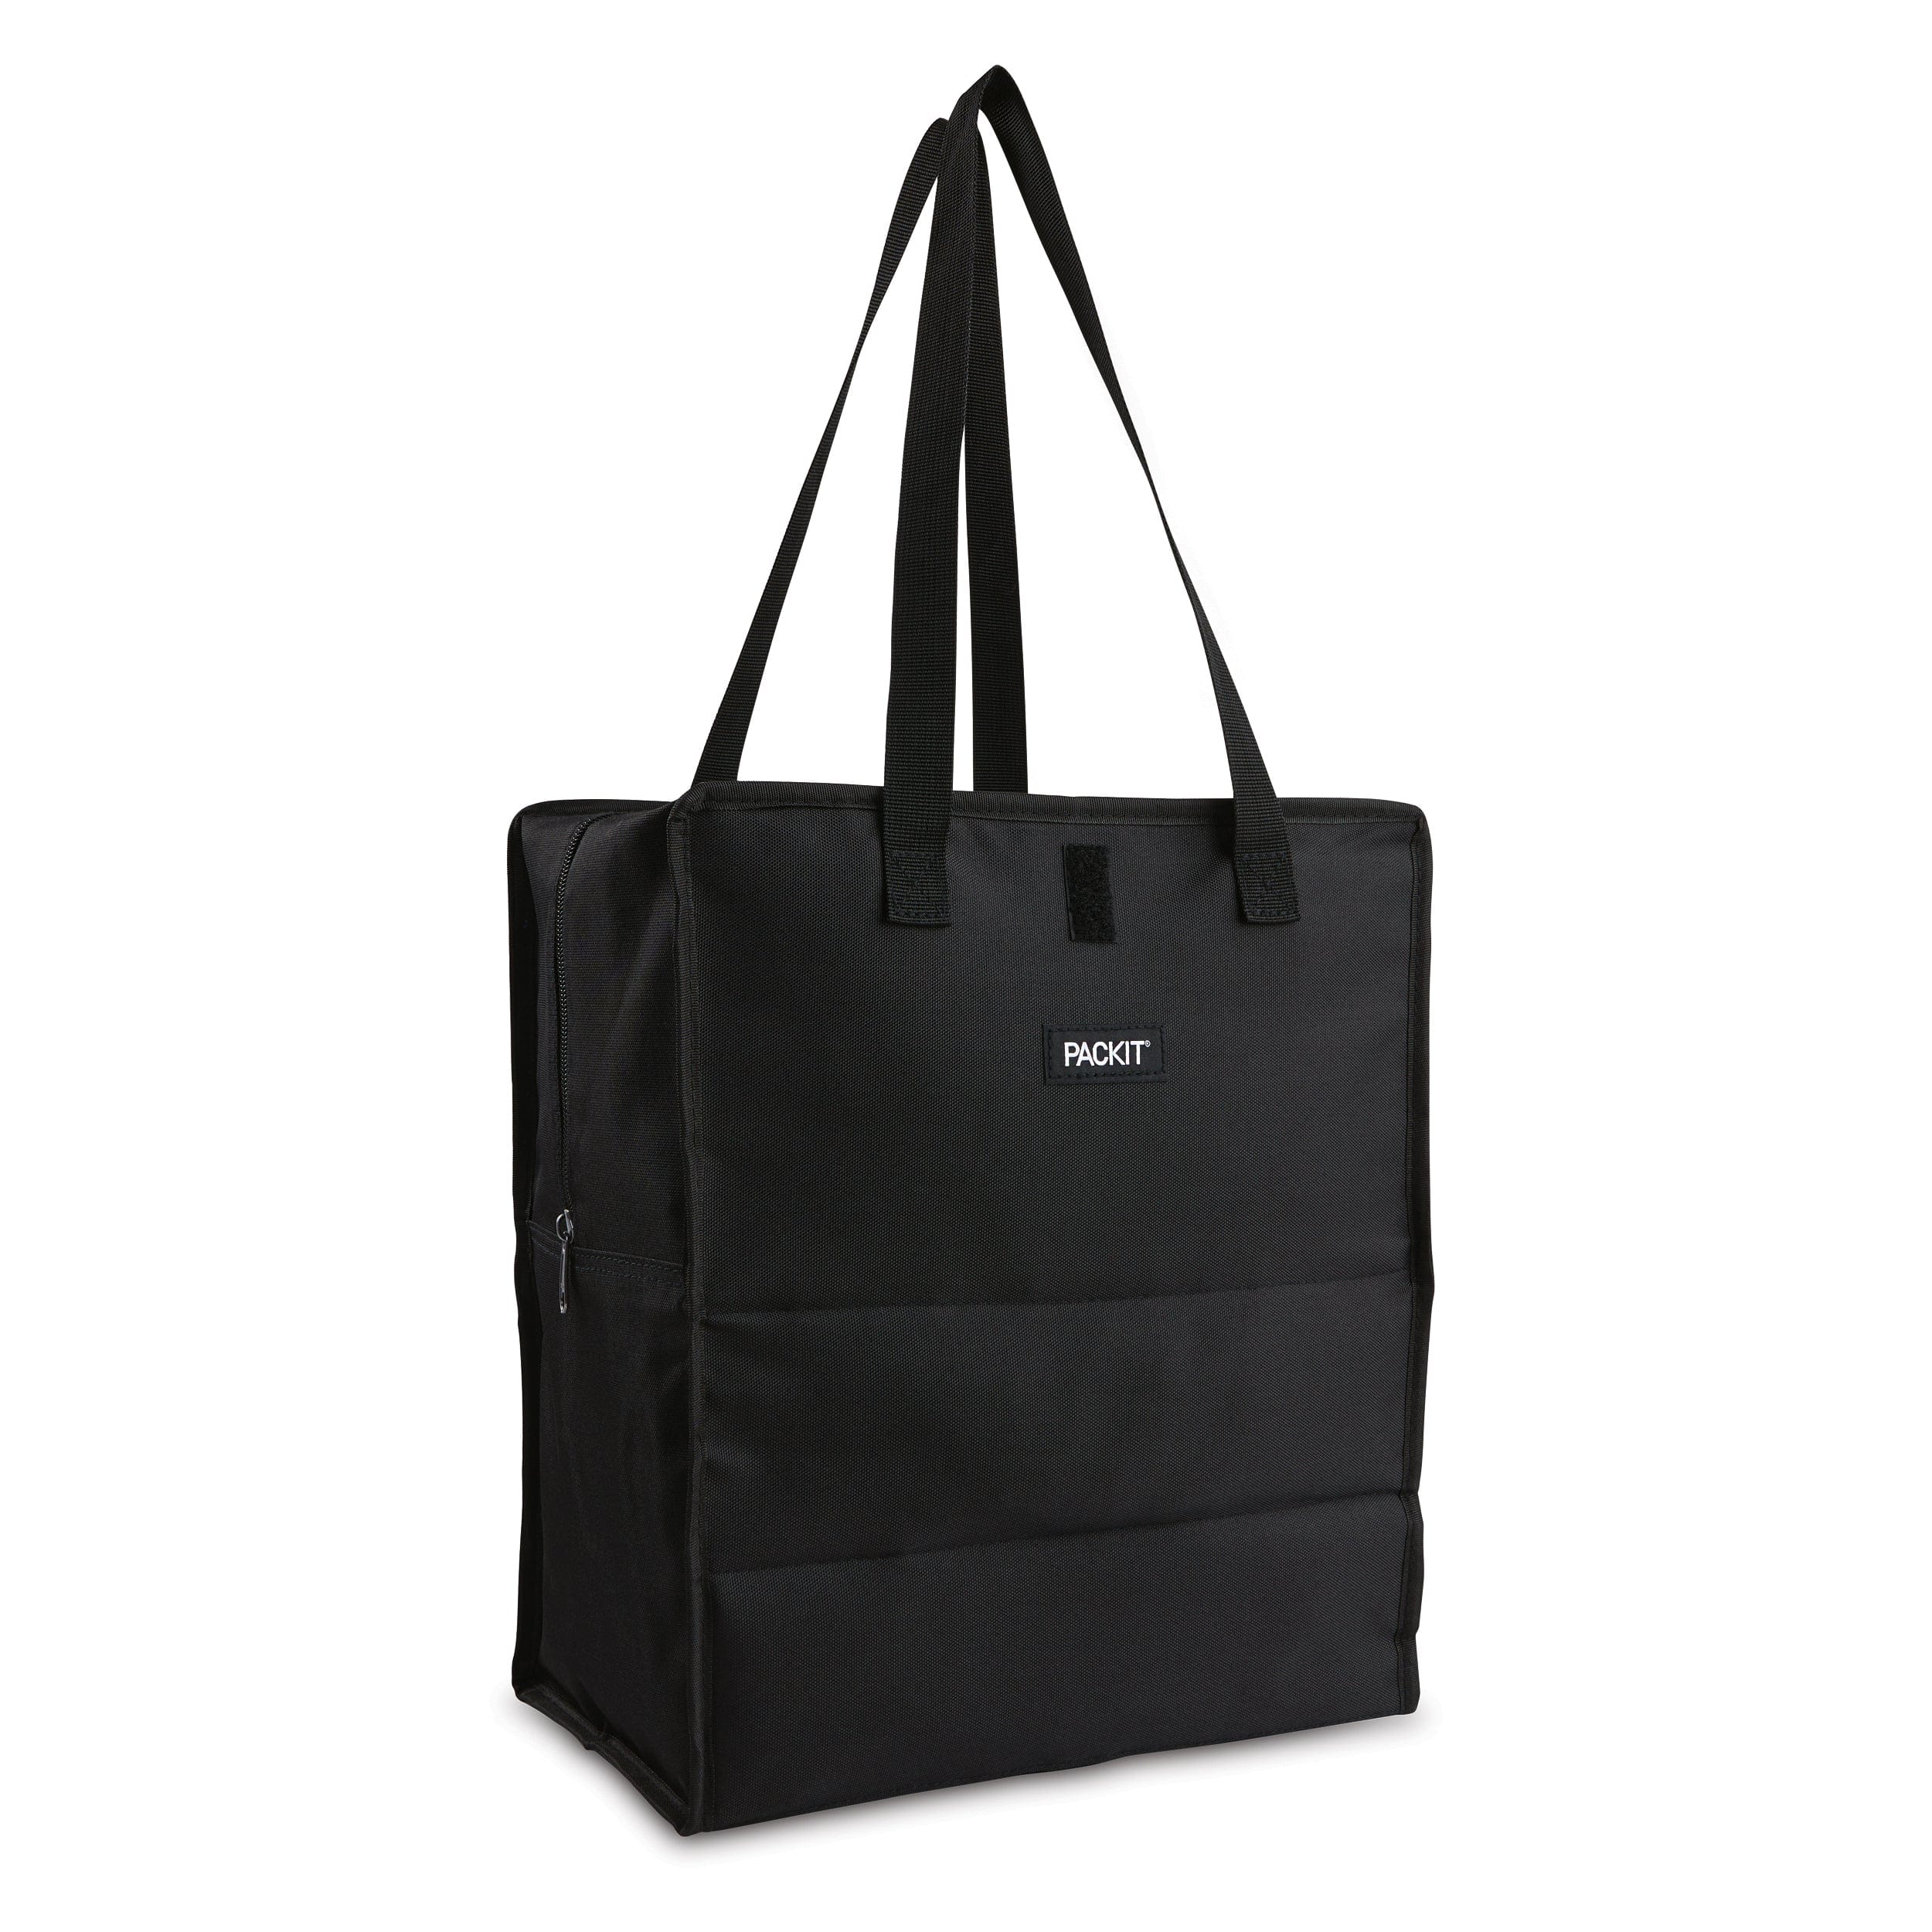 Freezable-Gorcery-Tote-FInals_0016_Freezable-Grocery-Tote-Black-Right-Straps-Up-Hires.jpg